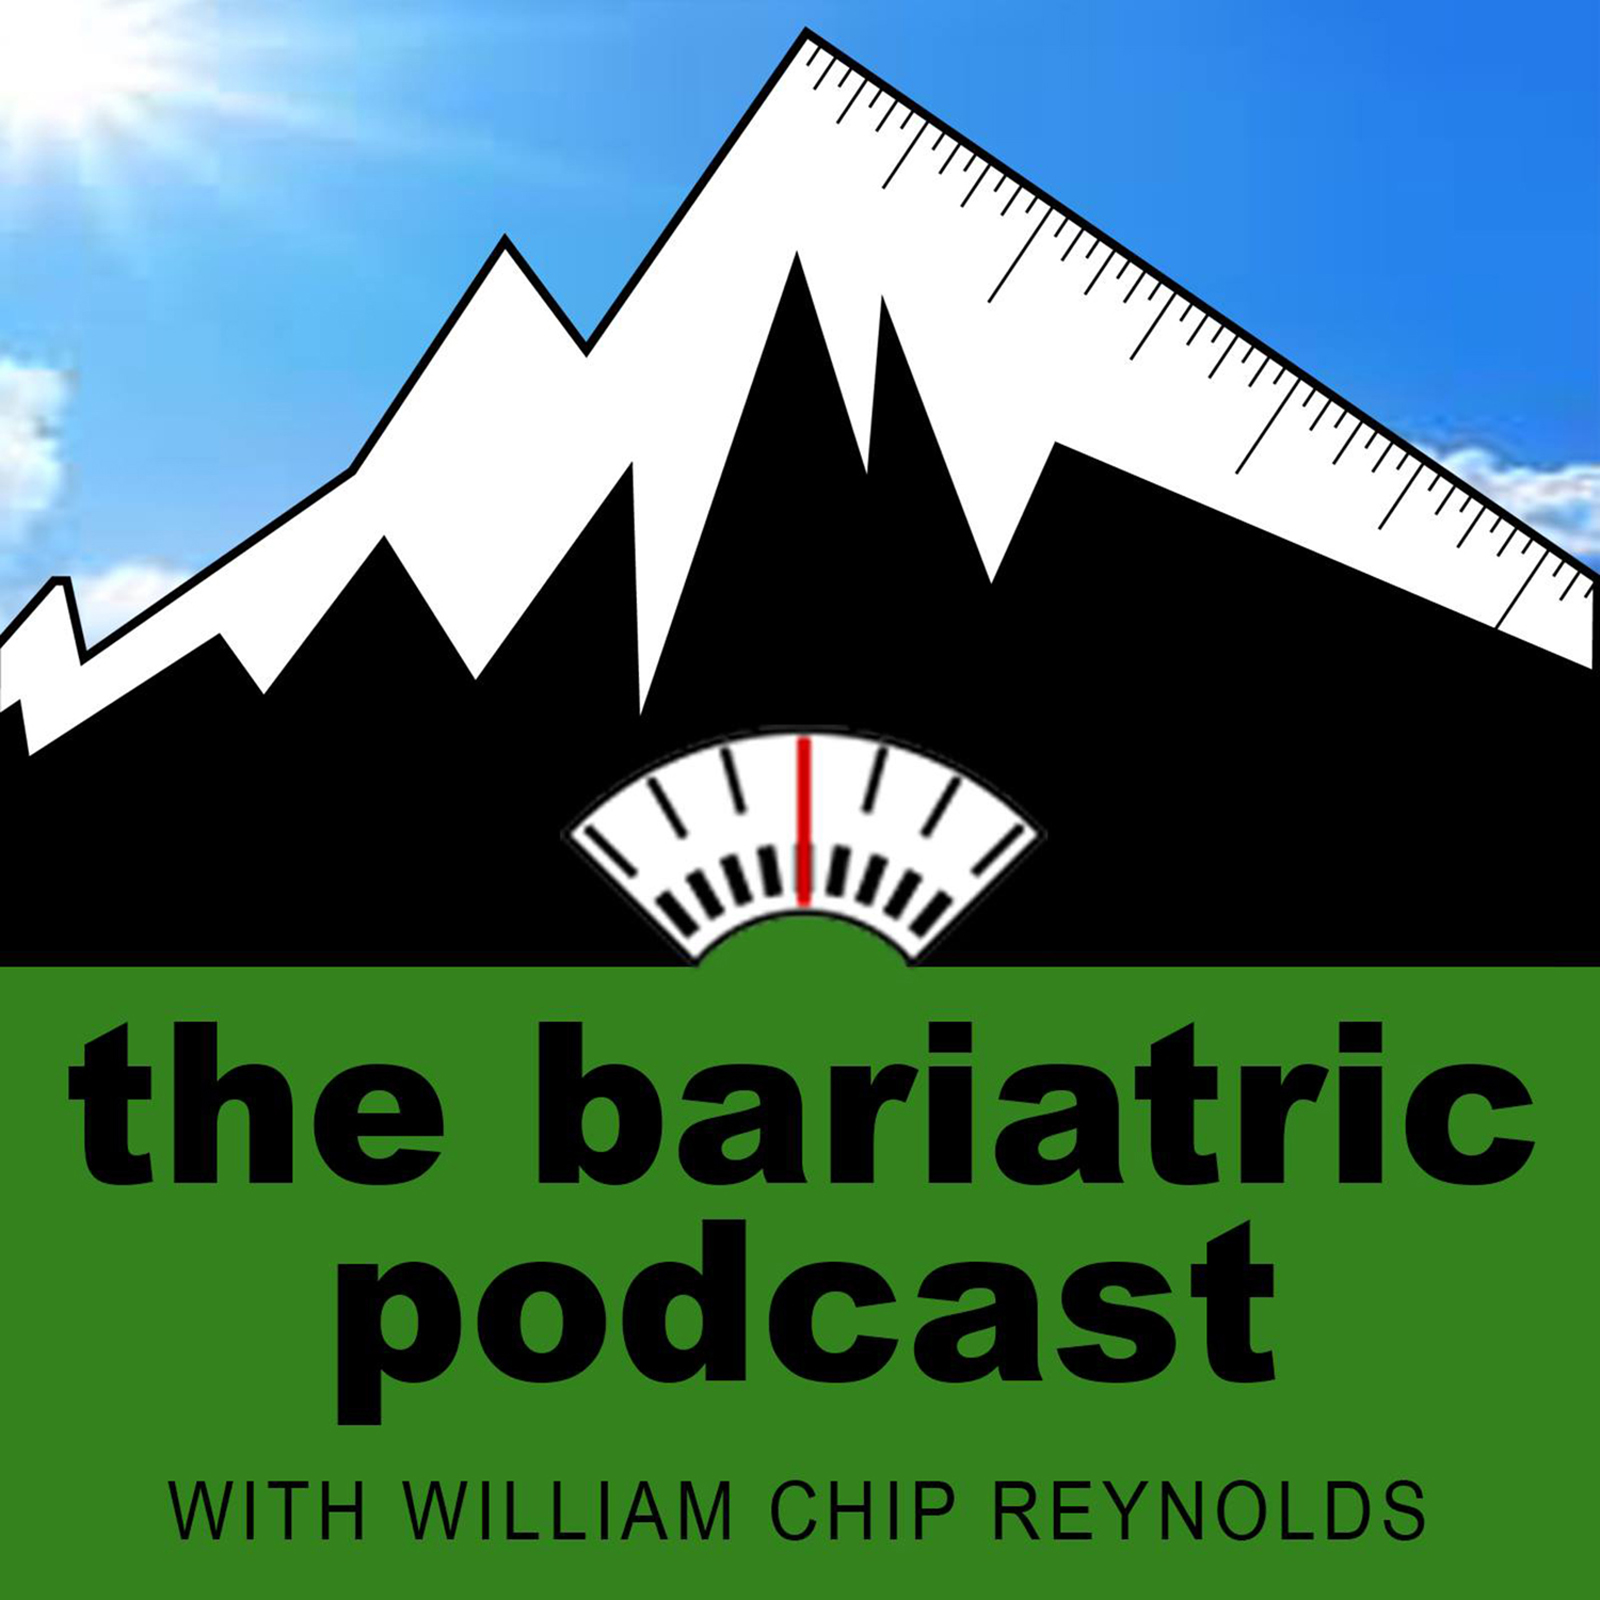 The Bariatric Podcast